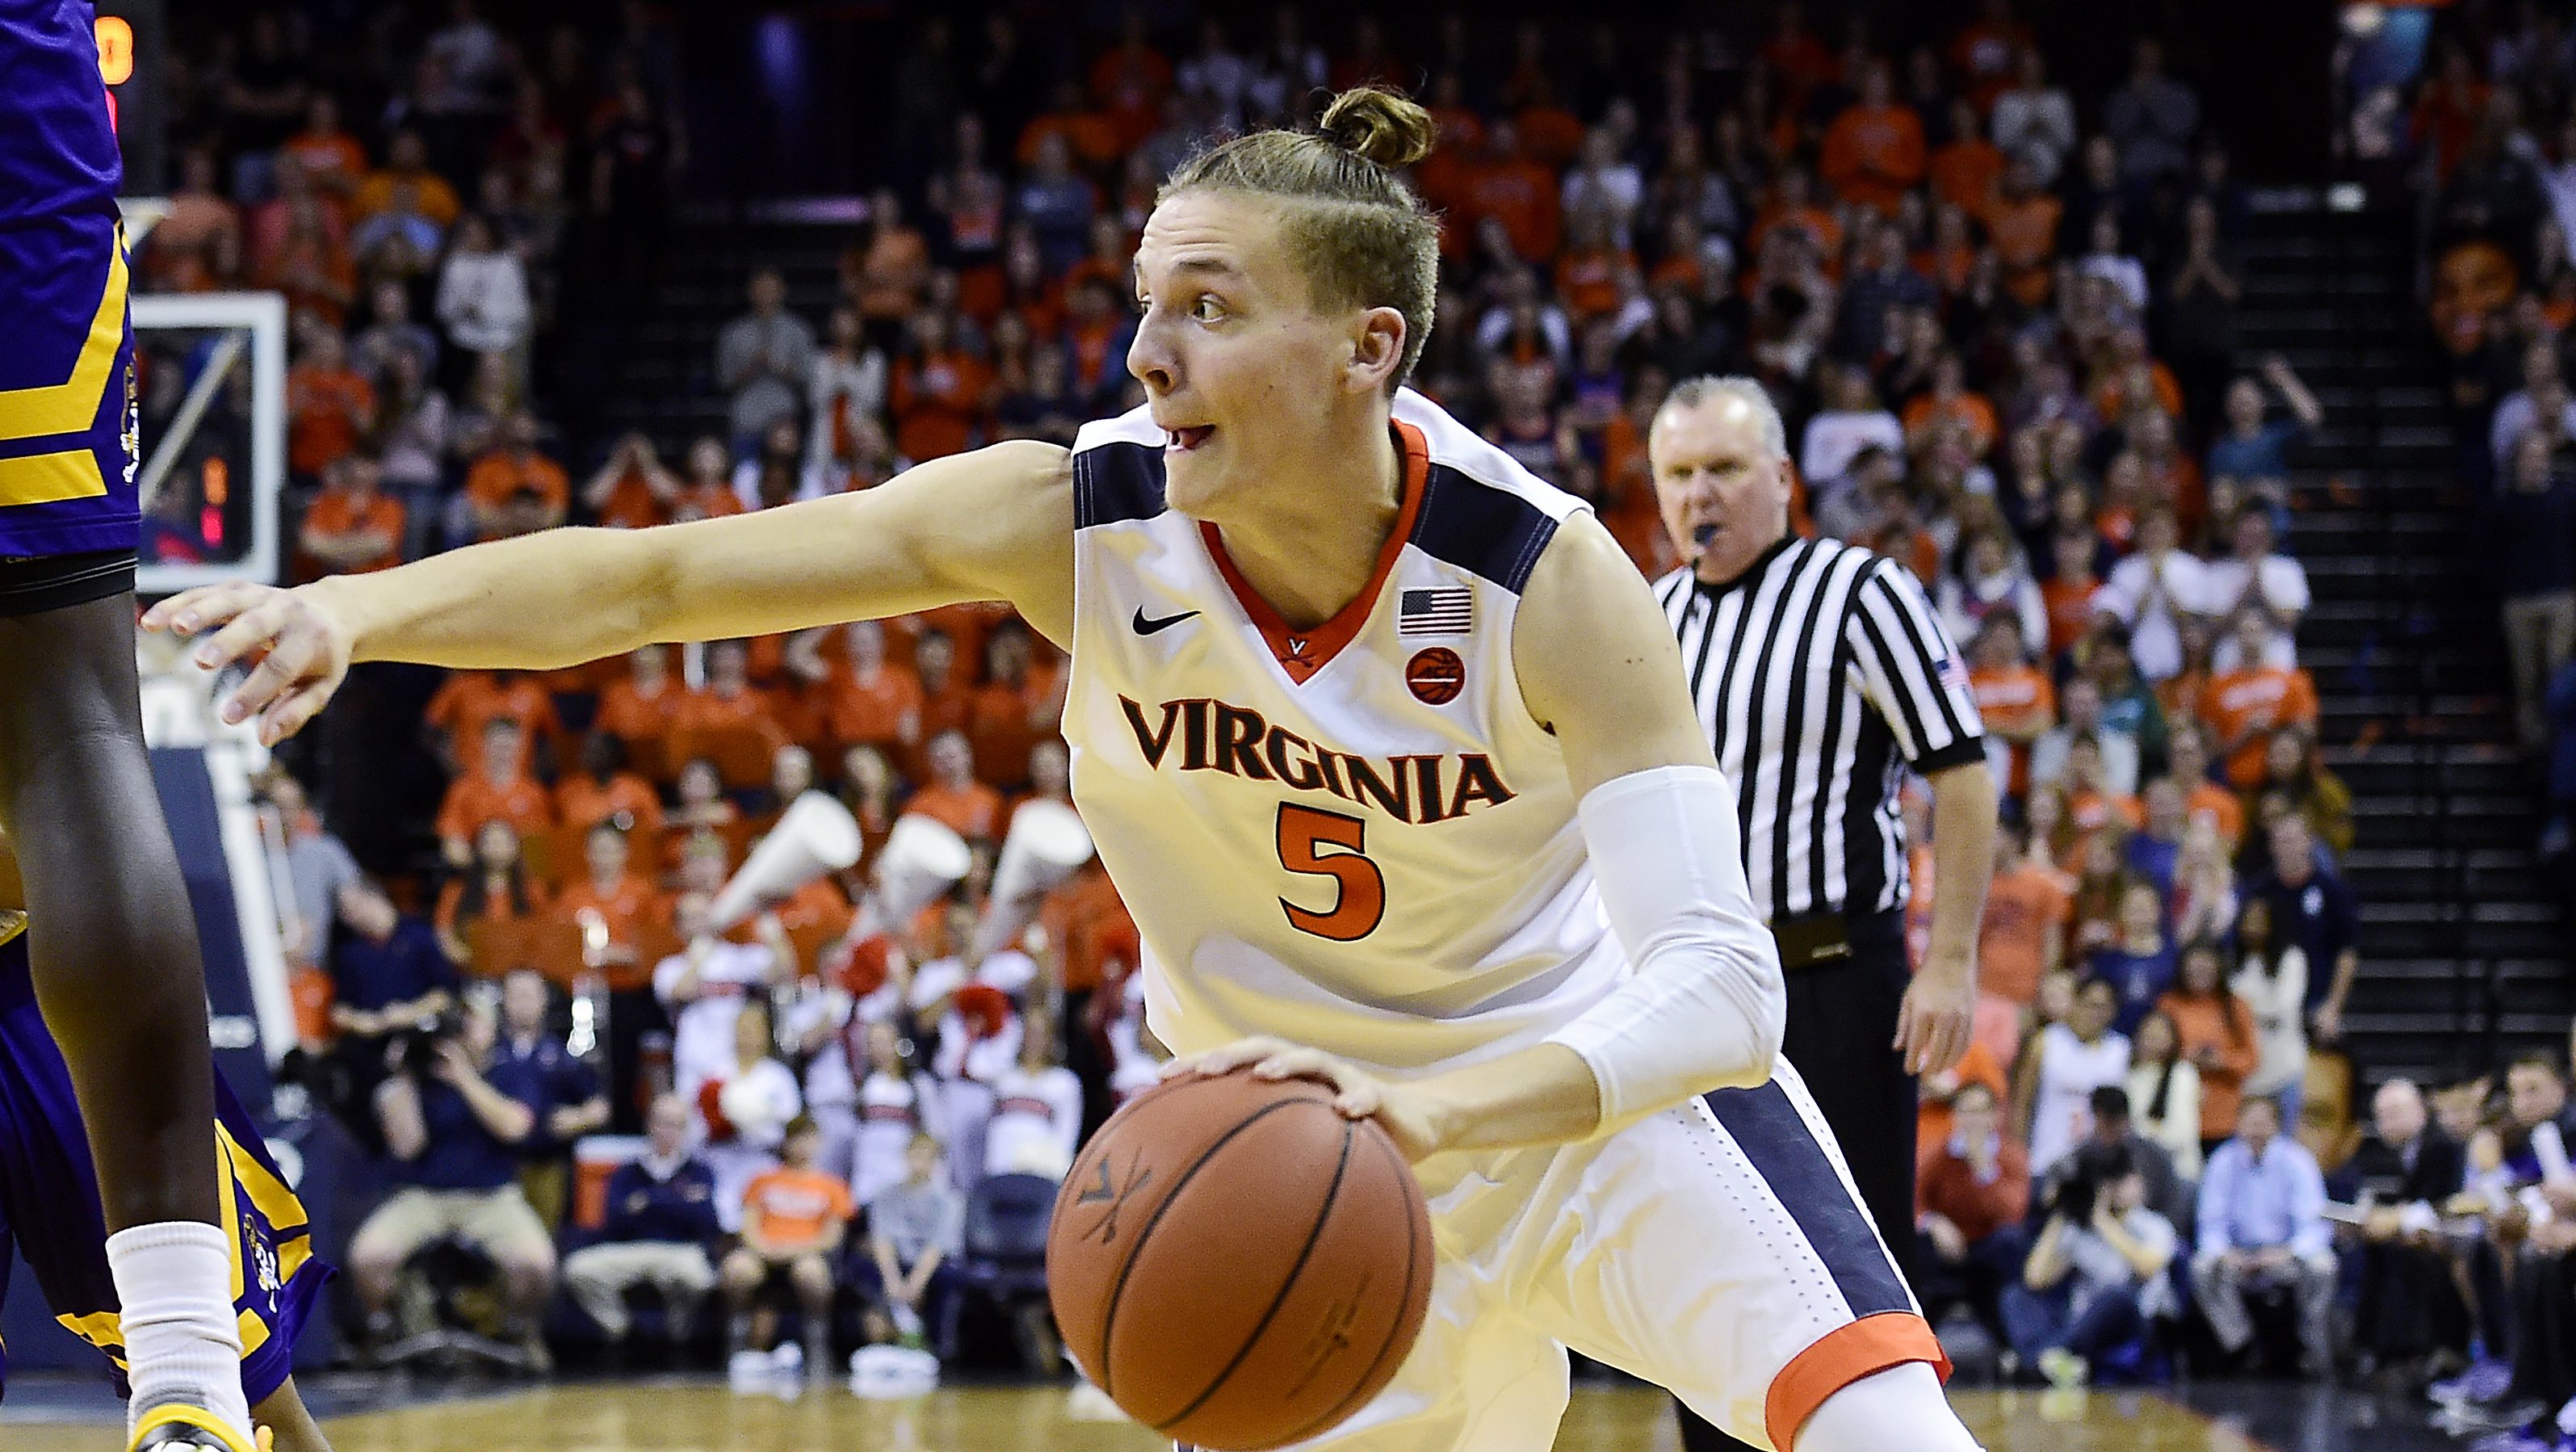 CHARLOTTESVILLE, VA - DECEMBER 06: Kyle Guy #5 of the Virginia Cavaliers goes to the basket in the second half during a game against the East Carolina Pirates at John Paul Jones Arena on December 6, 2016 in Charlottesville, Virginia. The Cavaliers defeated the Pirates 76-53. (Photo by Patrick McDermott/Getty Images)